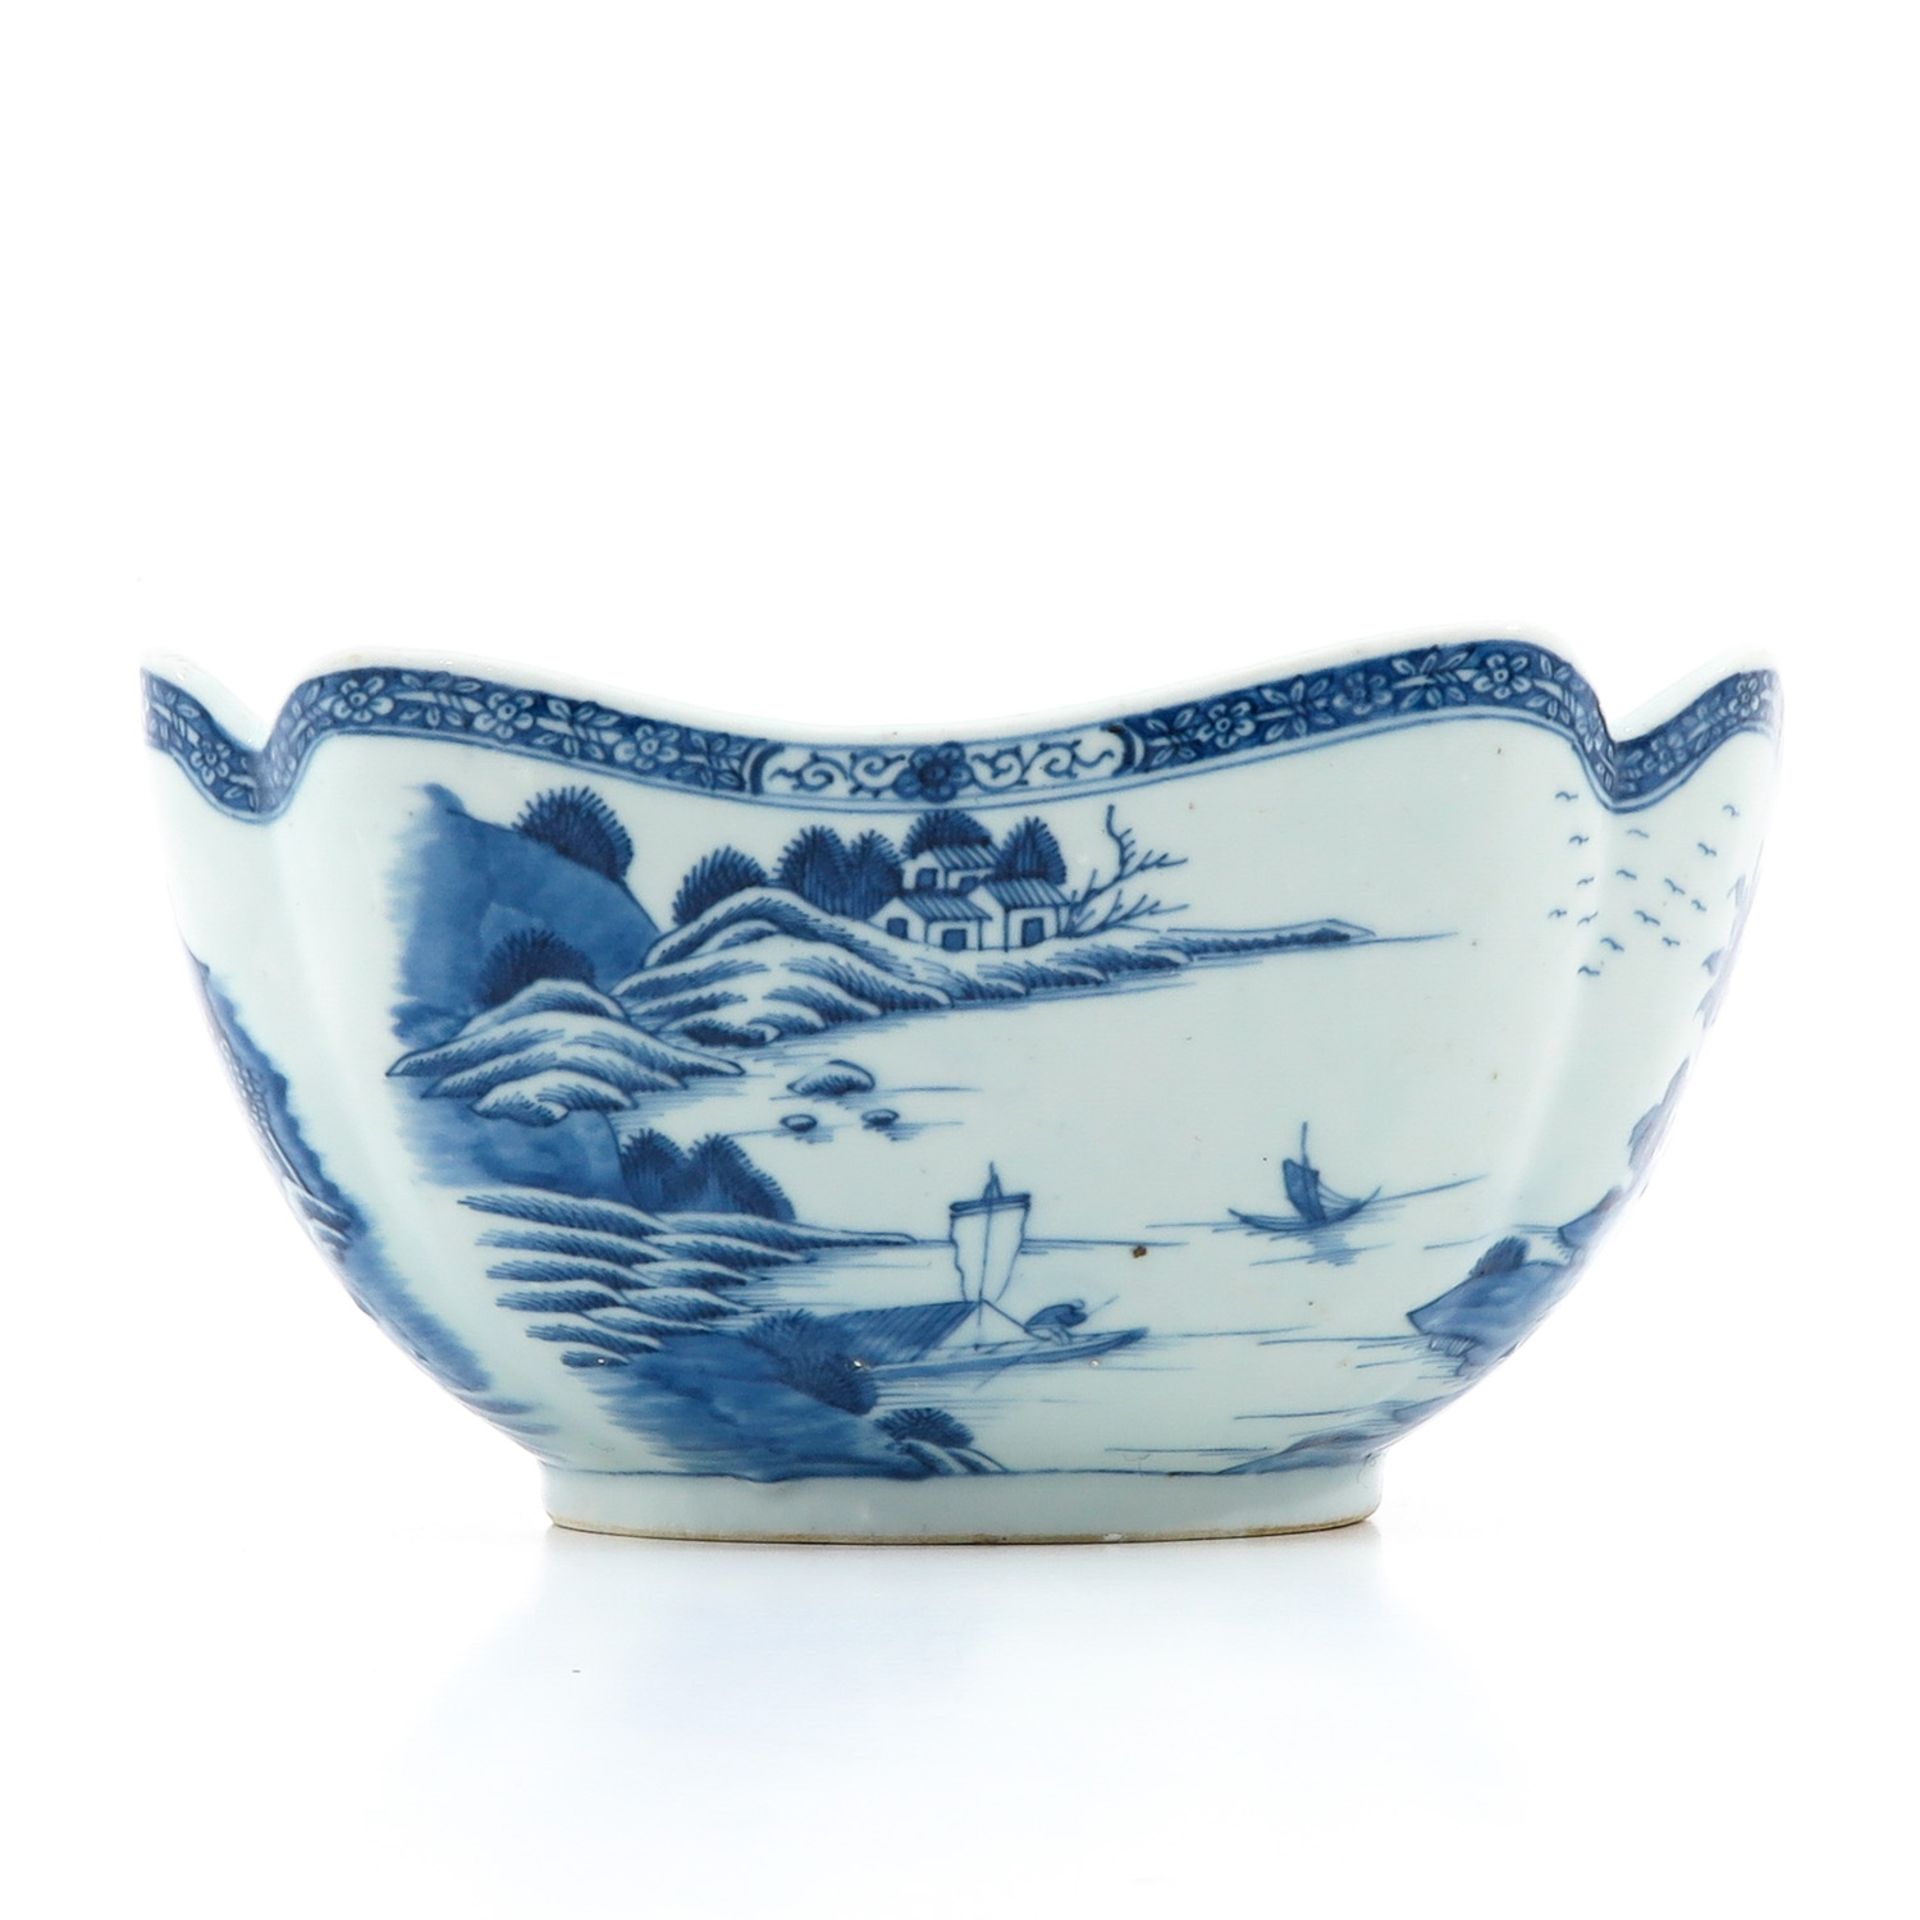 A Blue and White Serving Bowl - Image 2 of 9